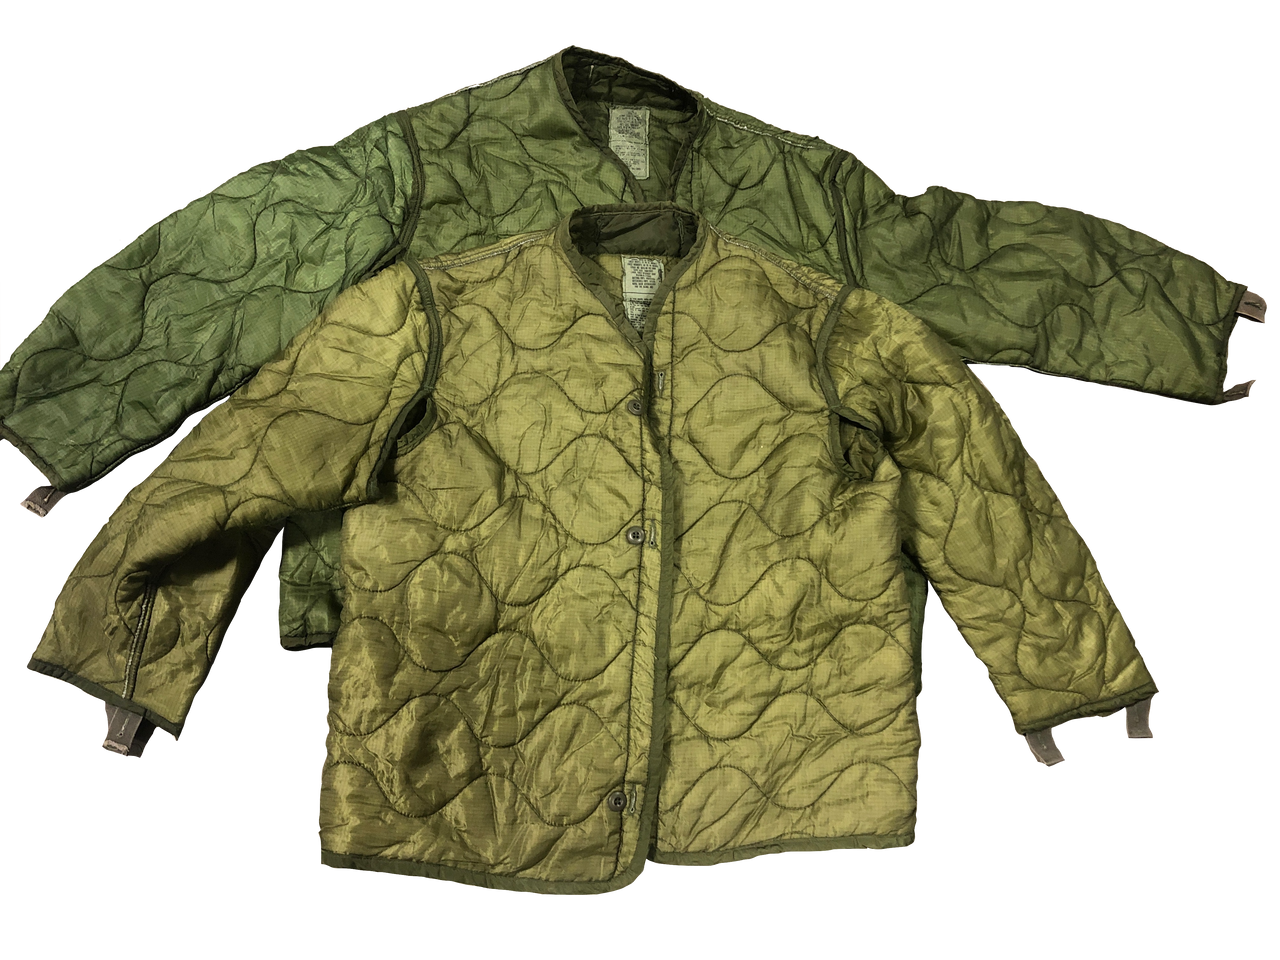 Used FAIR Condition Field Jacket Liner